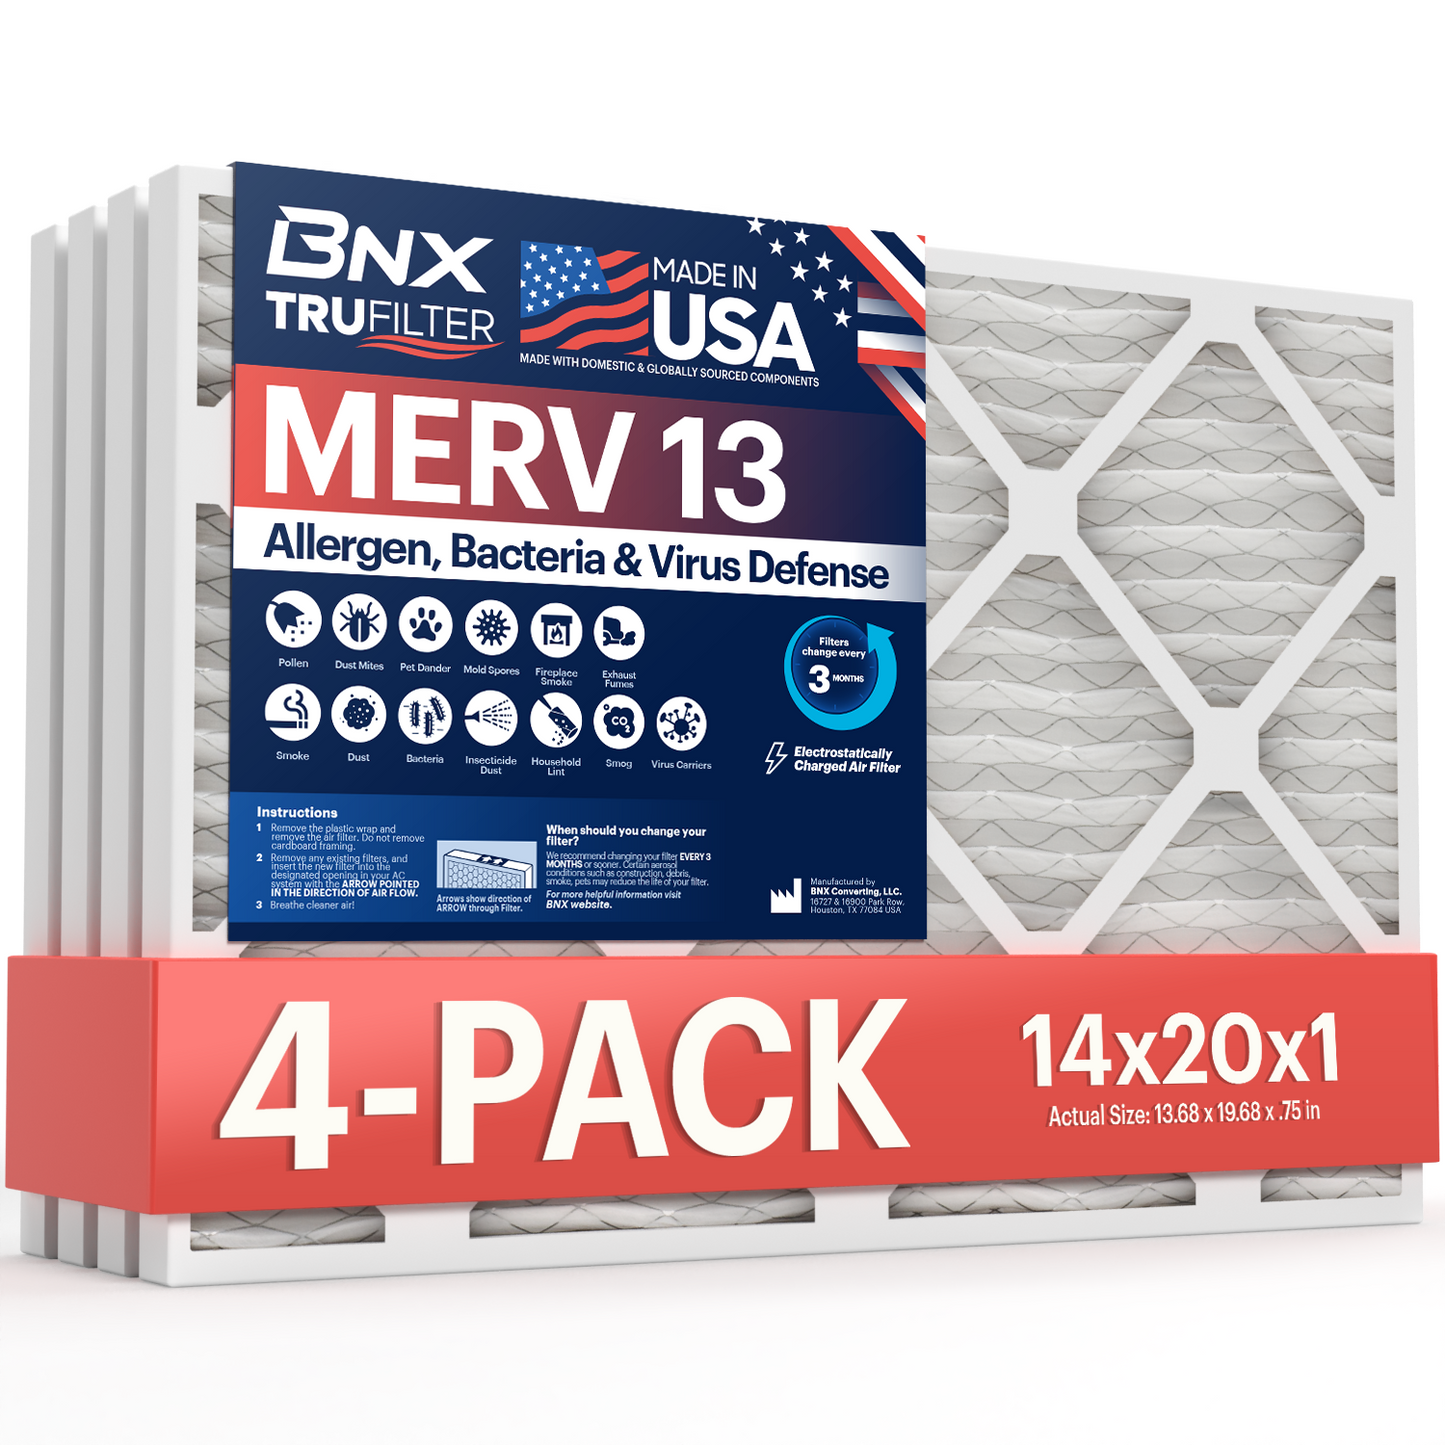 BNX TruFilter 14x20x1 MERV 13 Pleated Air Filter – Made in USA (4-Pack)